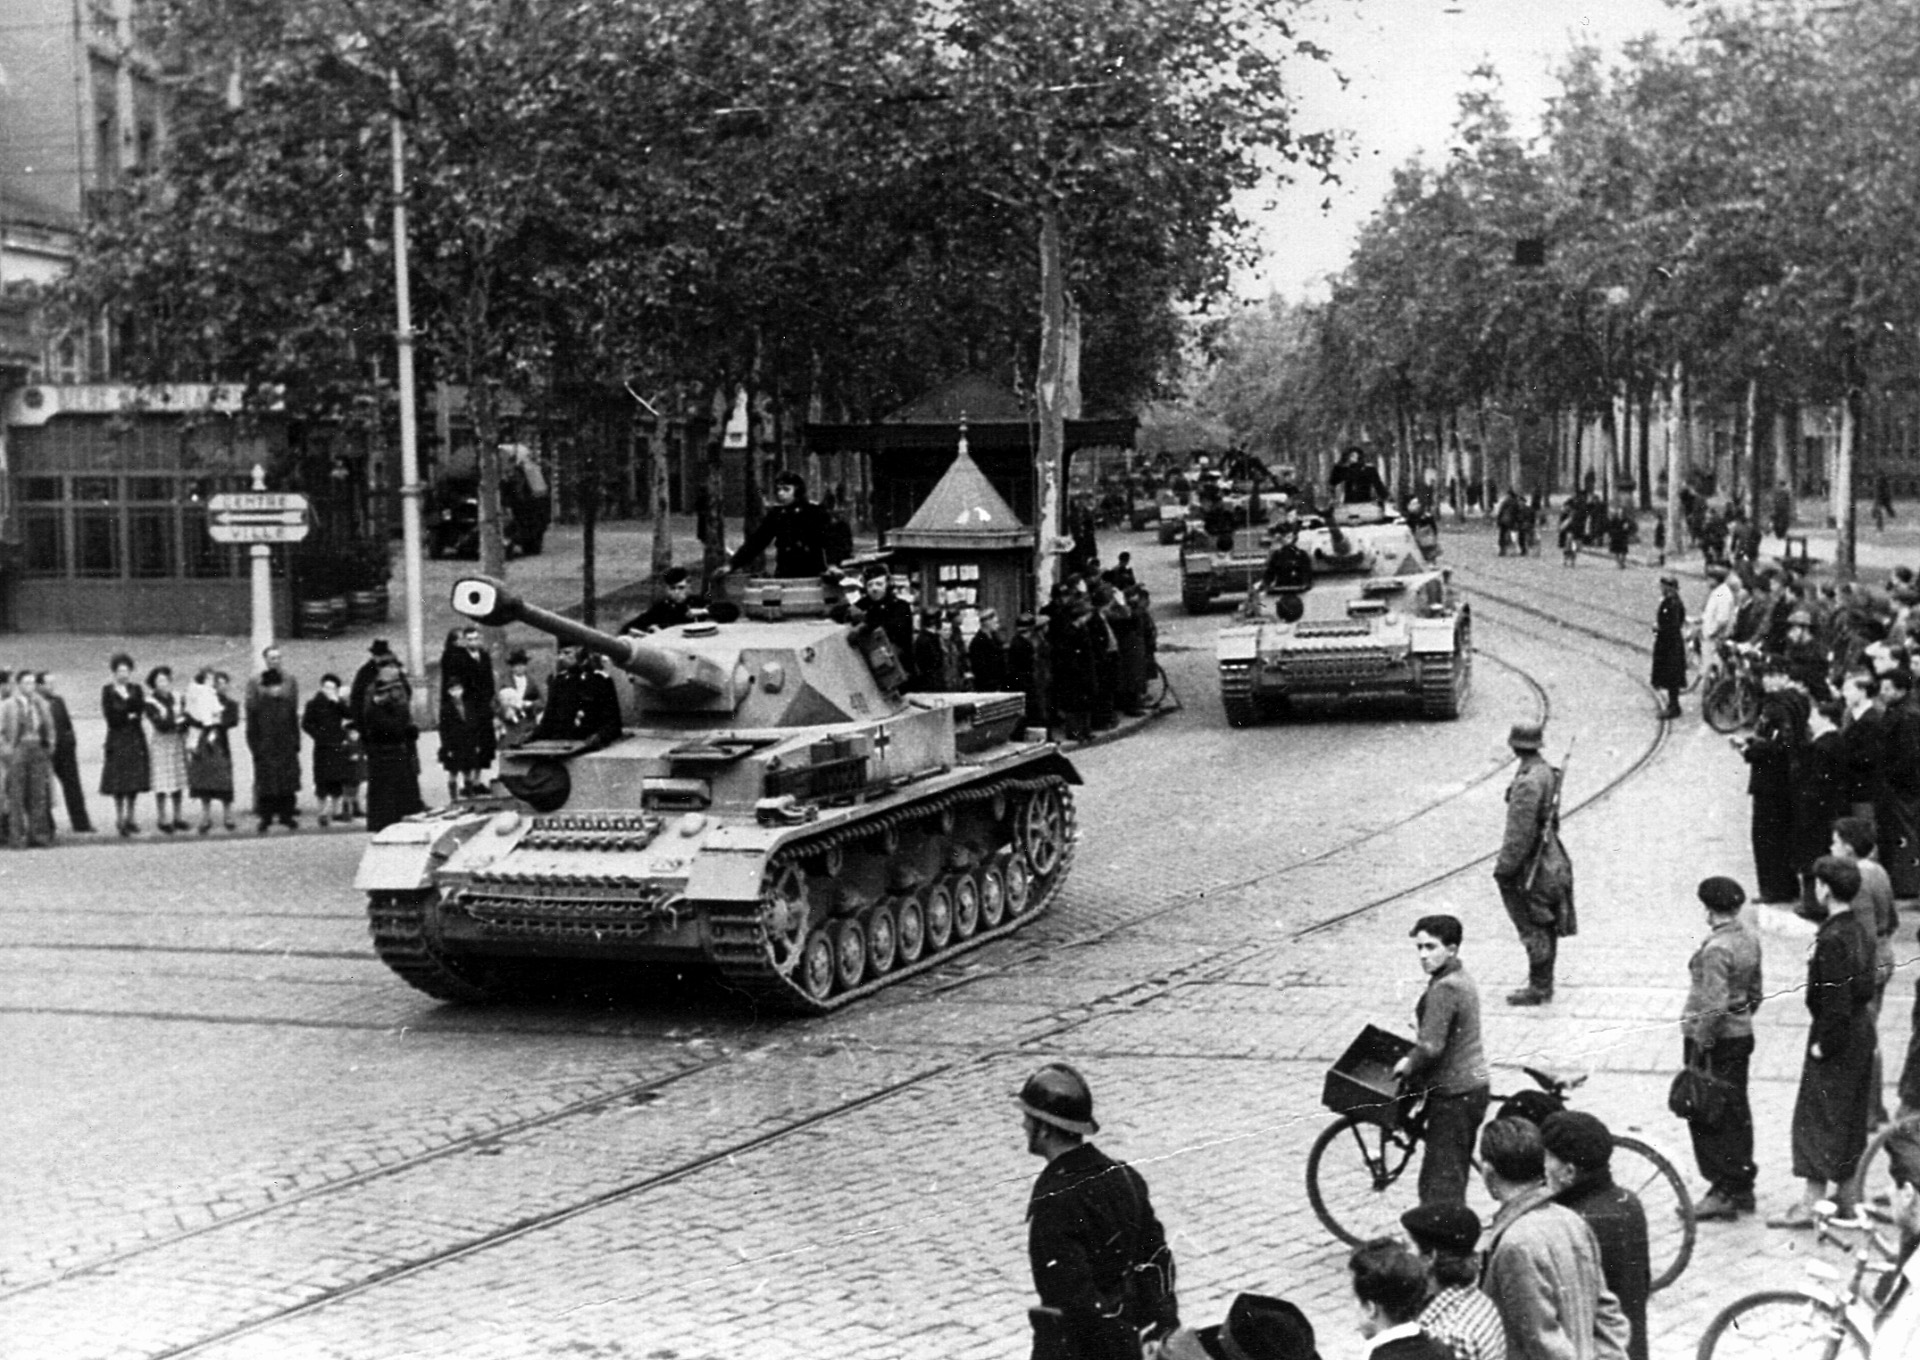 German tanks roll down a street in the city of Toulouse in southern France. The 11th Panzer Division was ordered south to stem the Allied tide prior to the landings of Operation Anvil-Dragoon, but it was ultimately battered and forced to retire. 